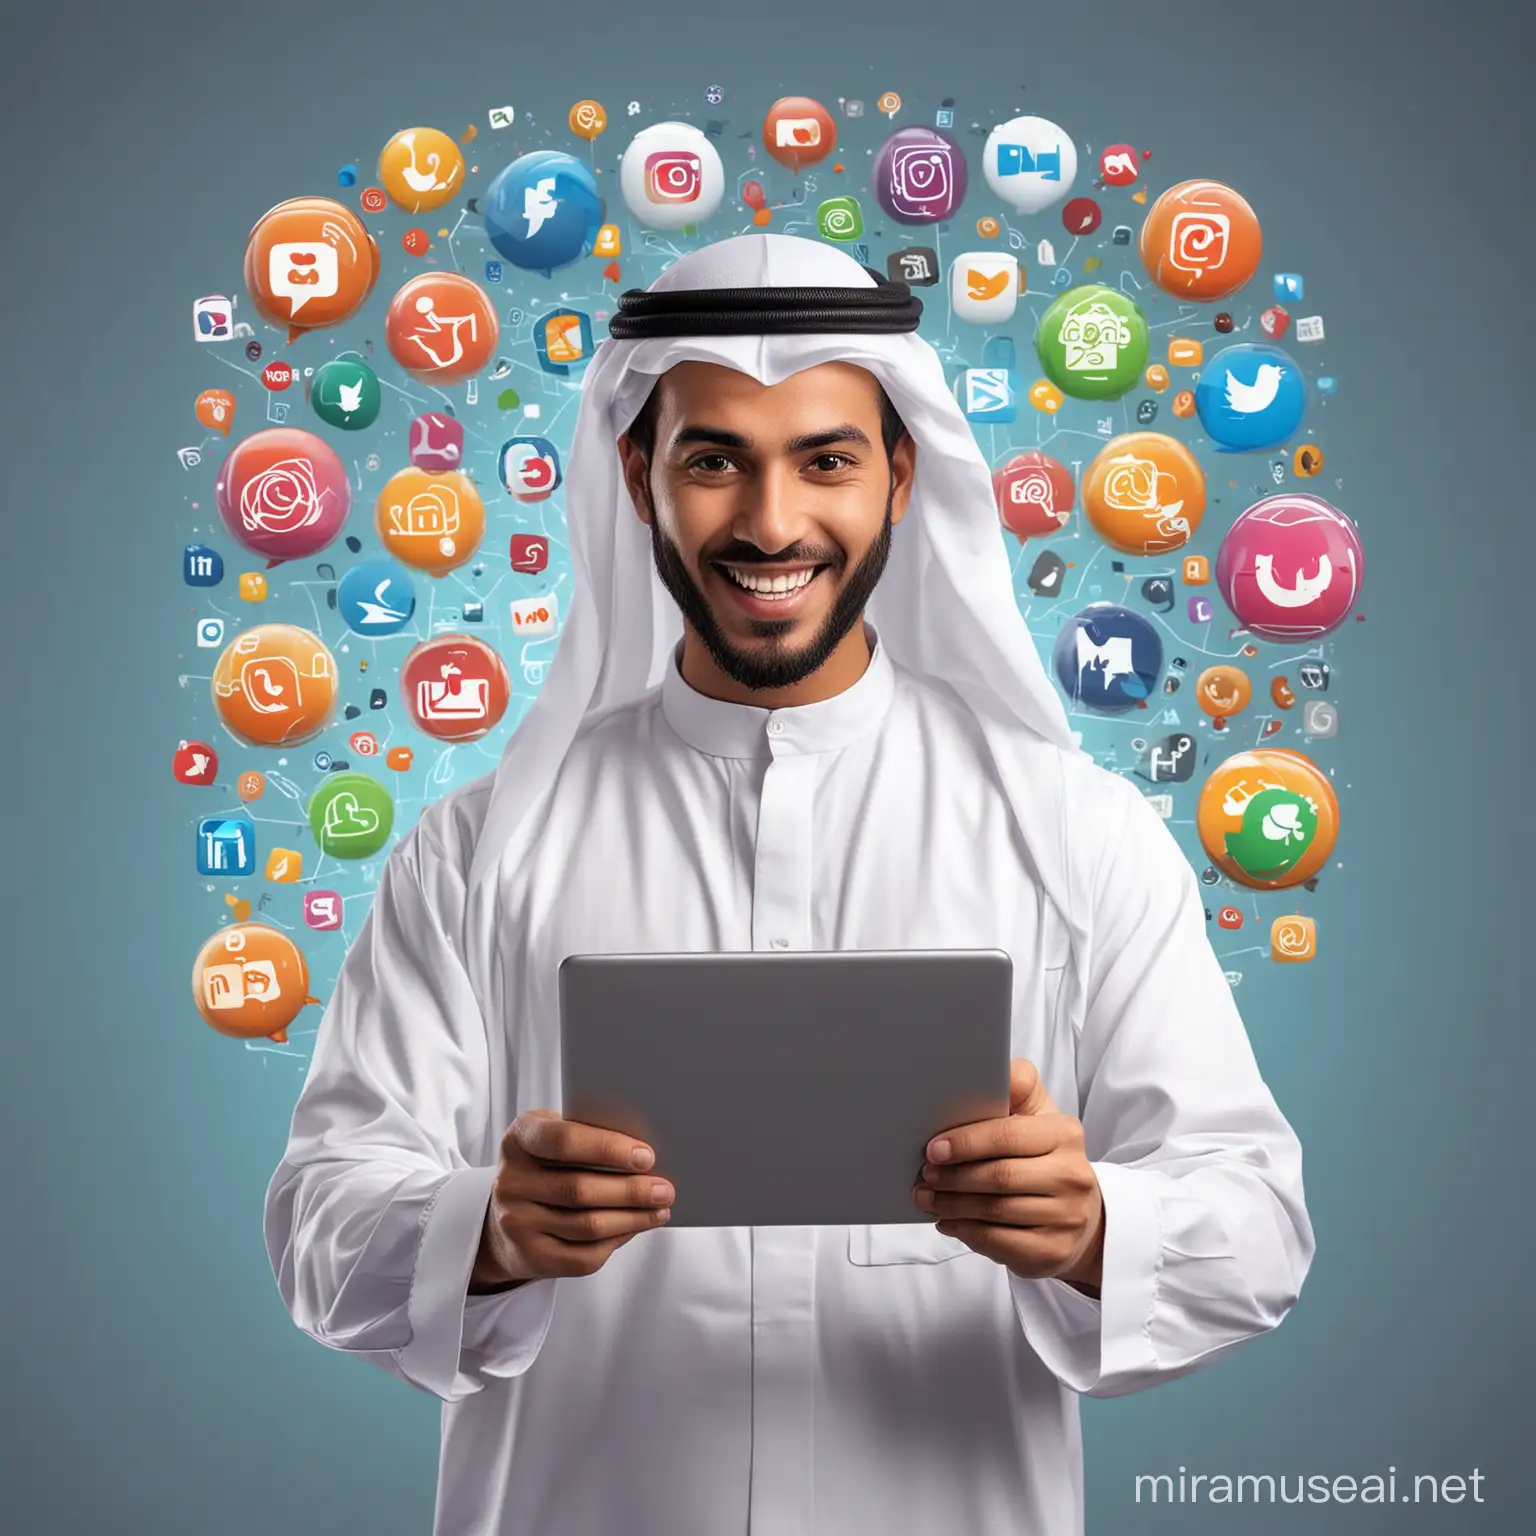 Arabic Man in Joyful Action Pose Surrounded by Social Media and Email Icons